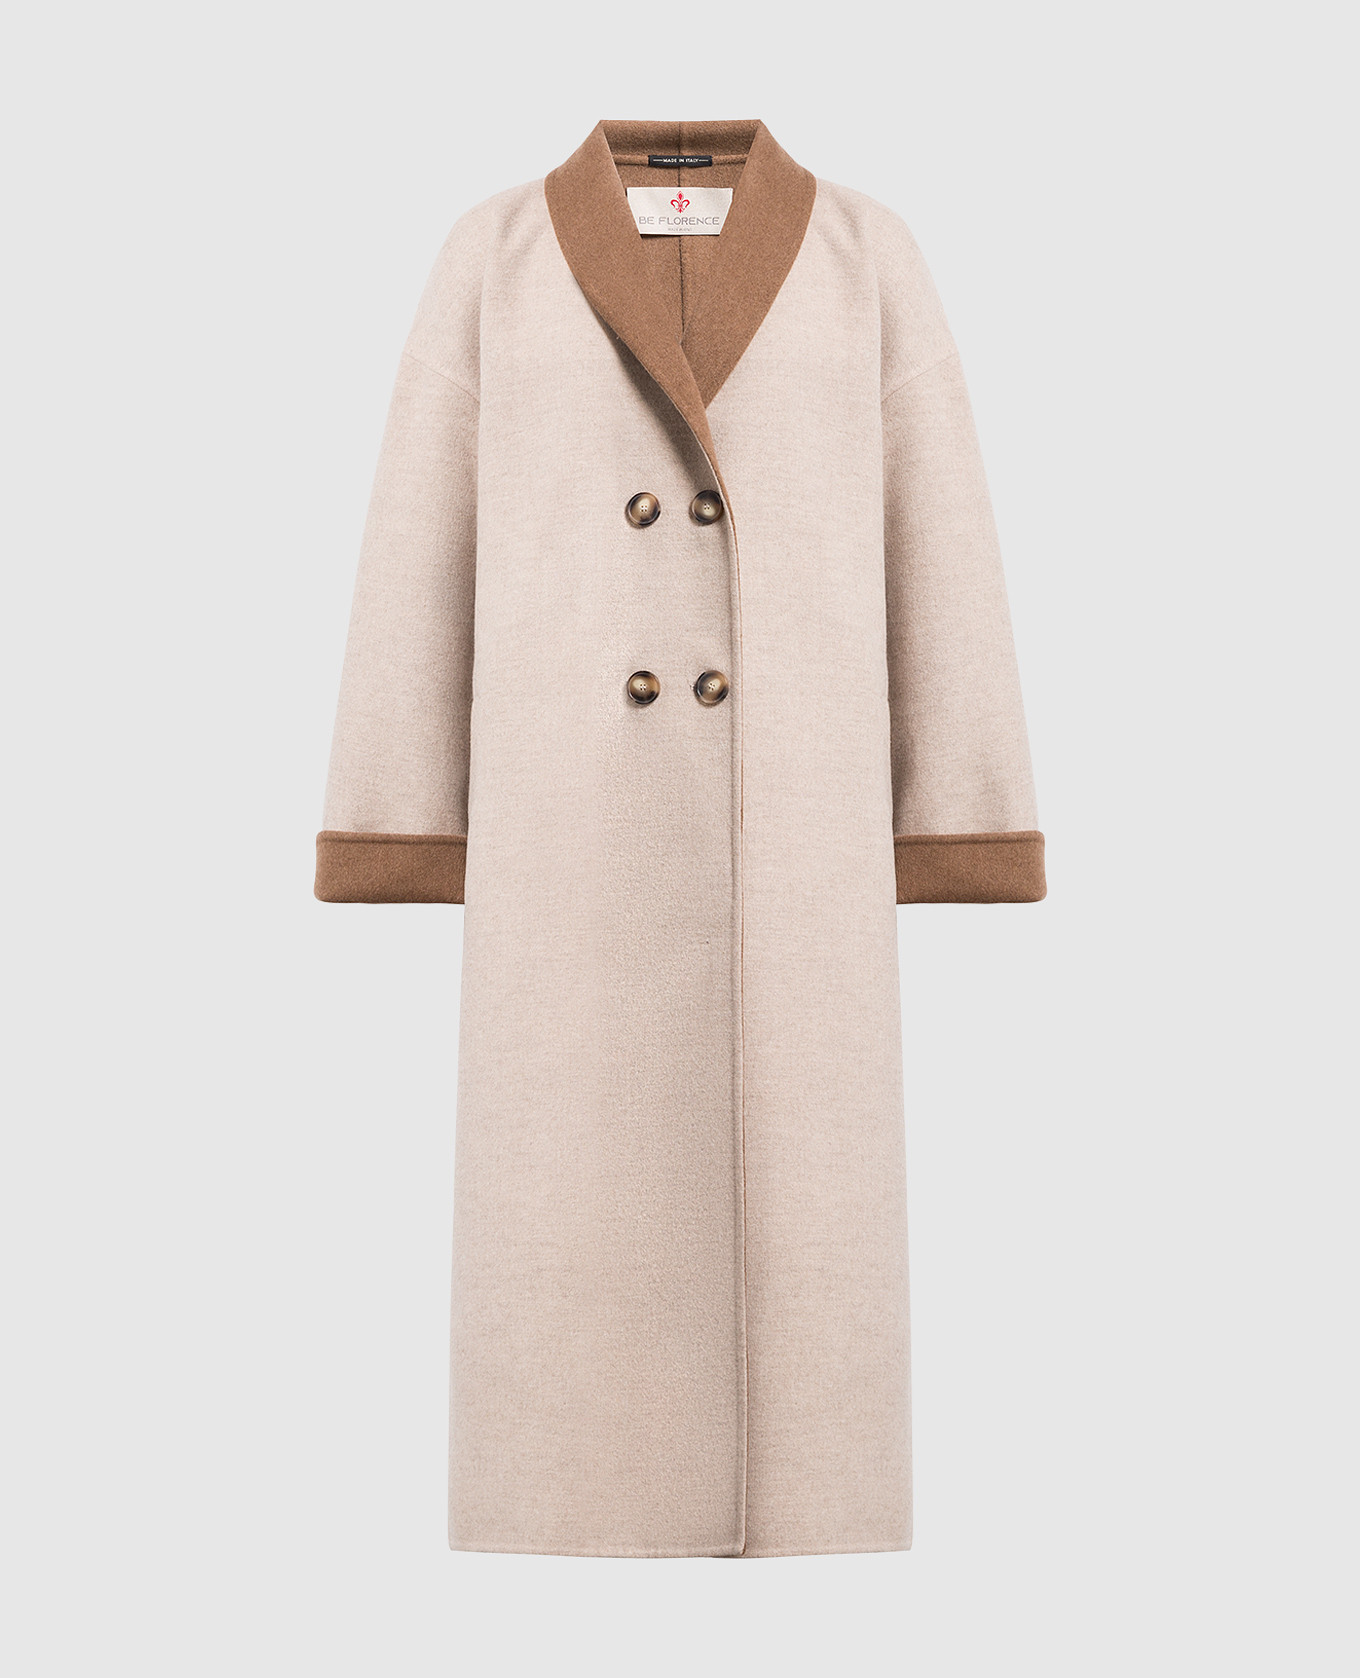 Beige double-breasted coat made of wool